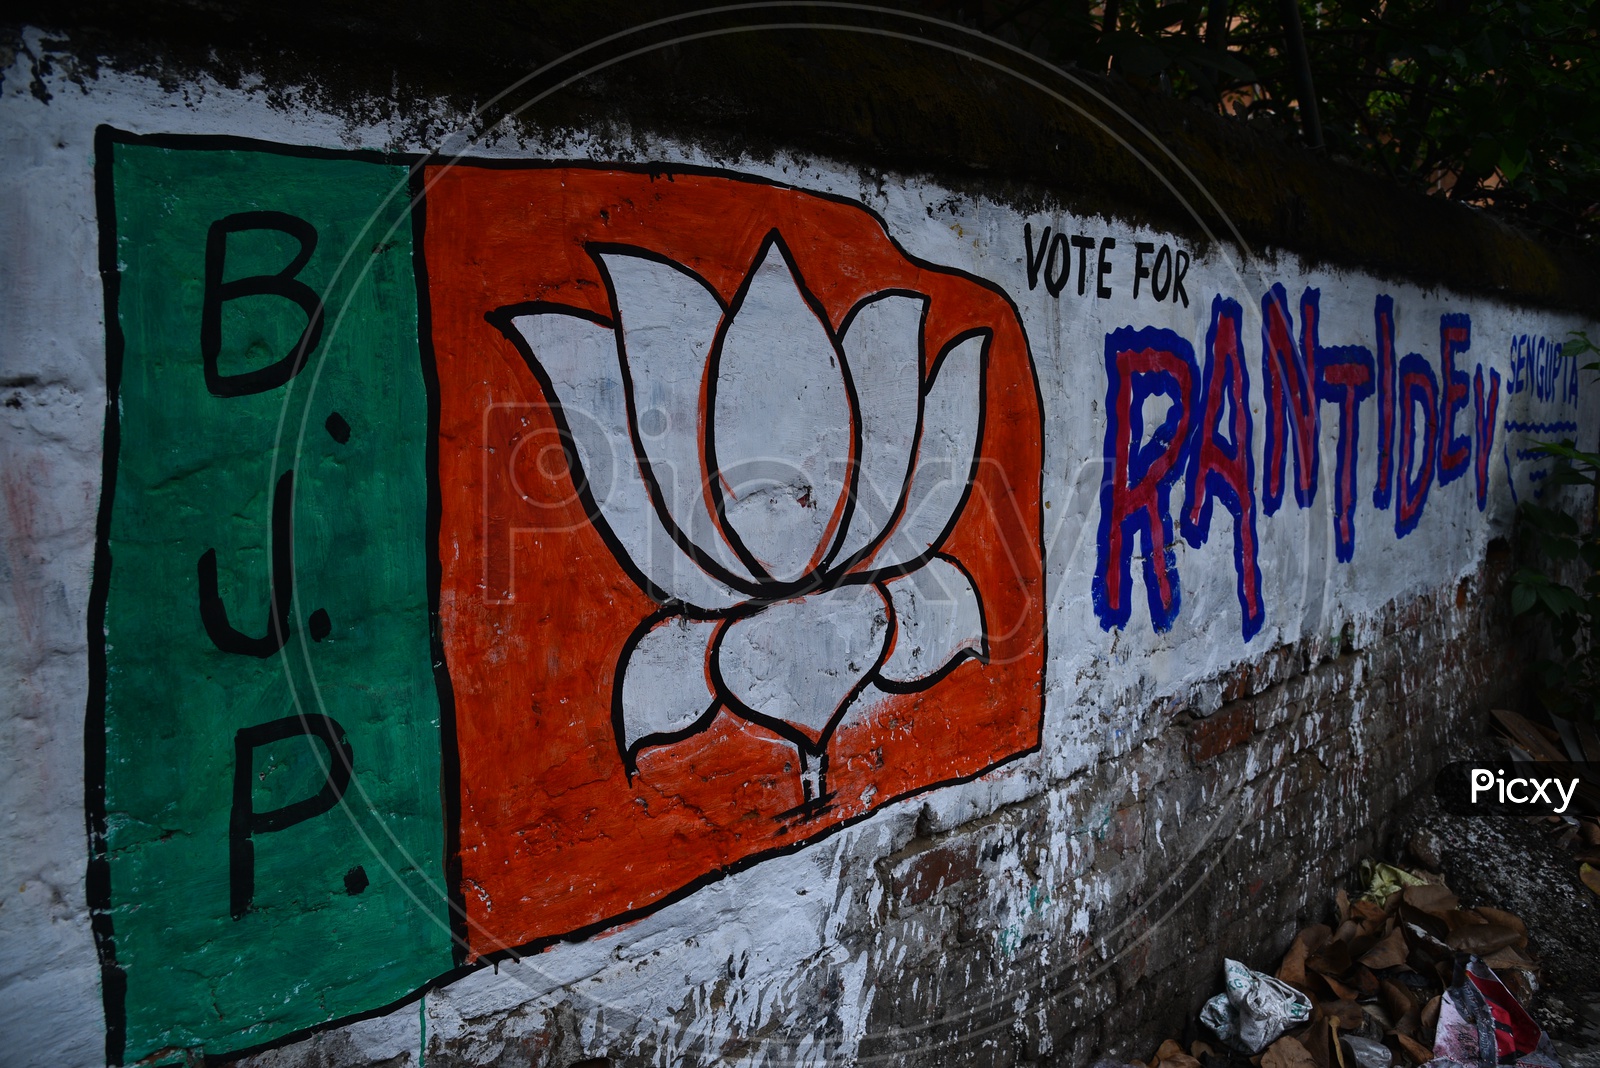 BJP  Party Symbol Painting  On  Walls Of  Howrah  As an Election Campaign